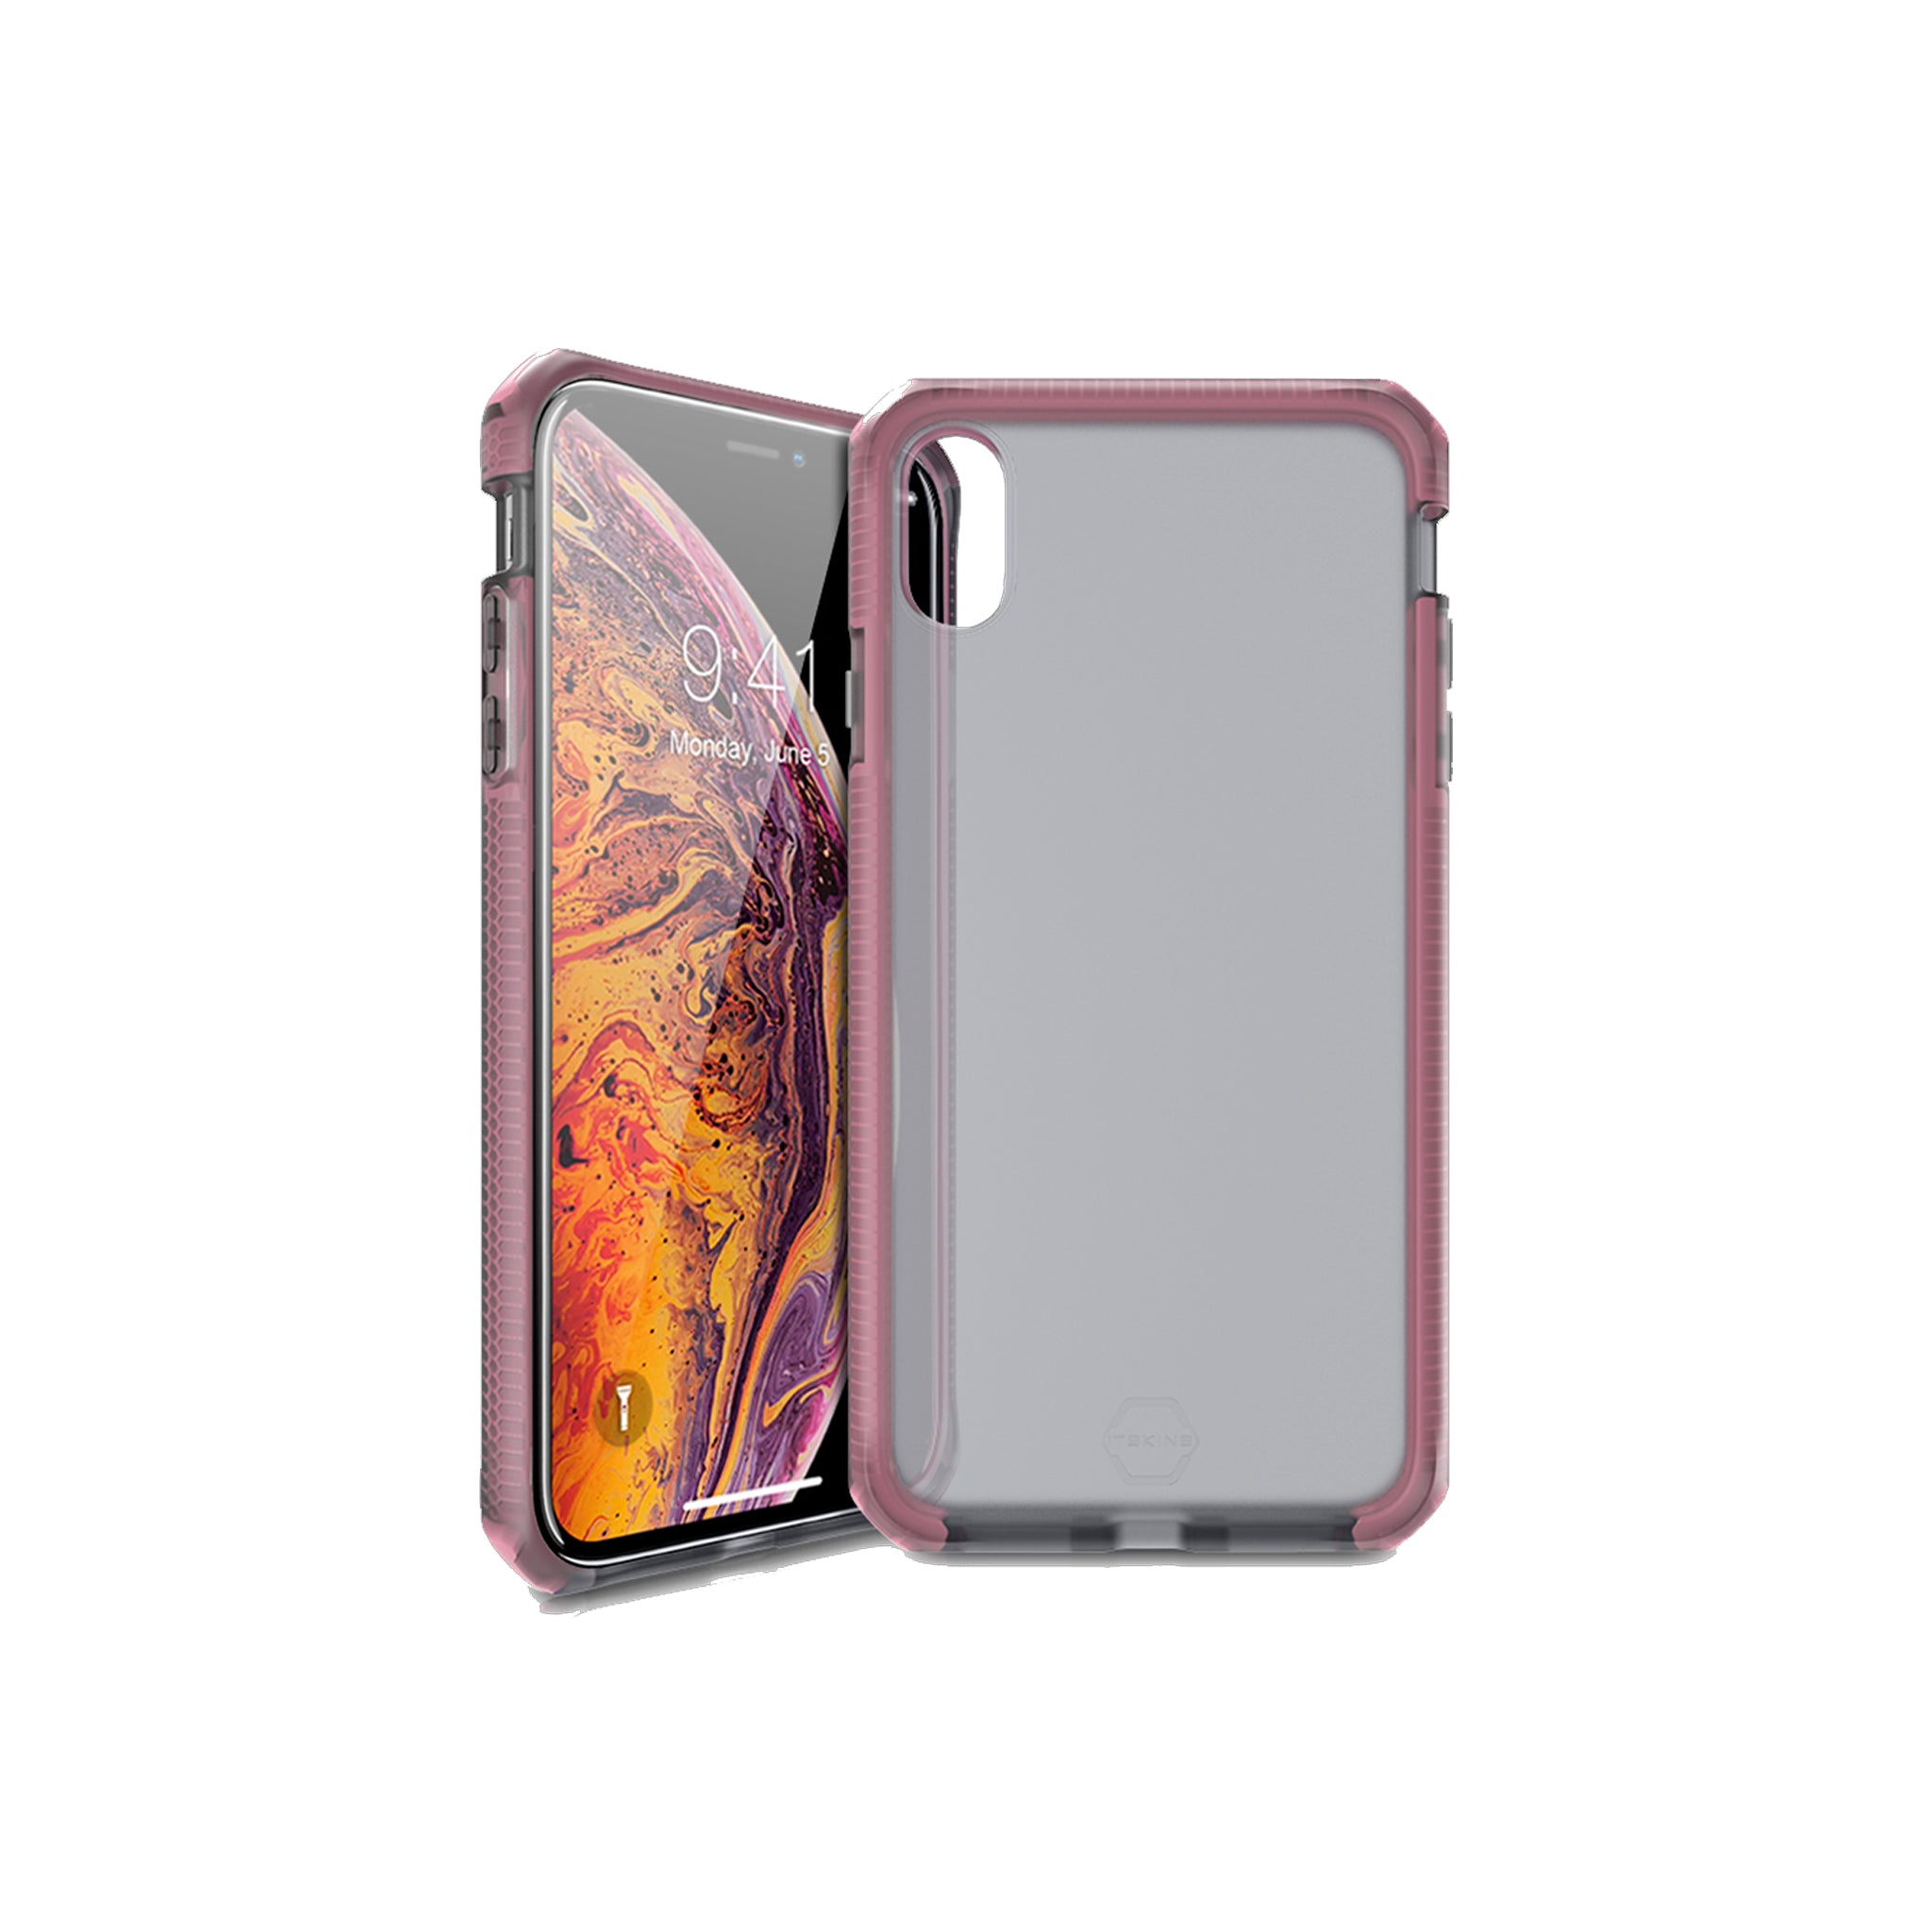 Itskins - Supreme Frost Case For Apple iPhone Xs Max - Baby Pink And Black